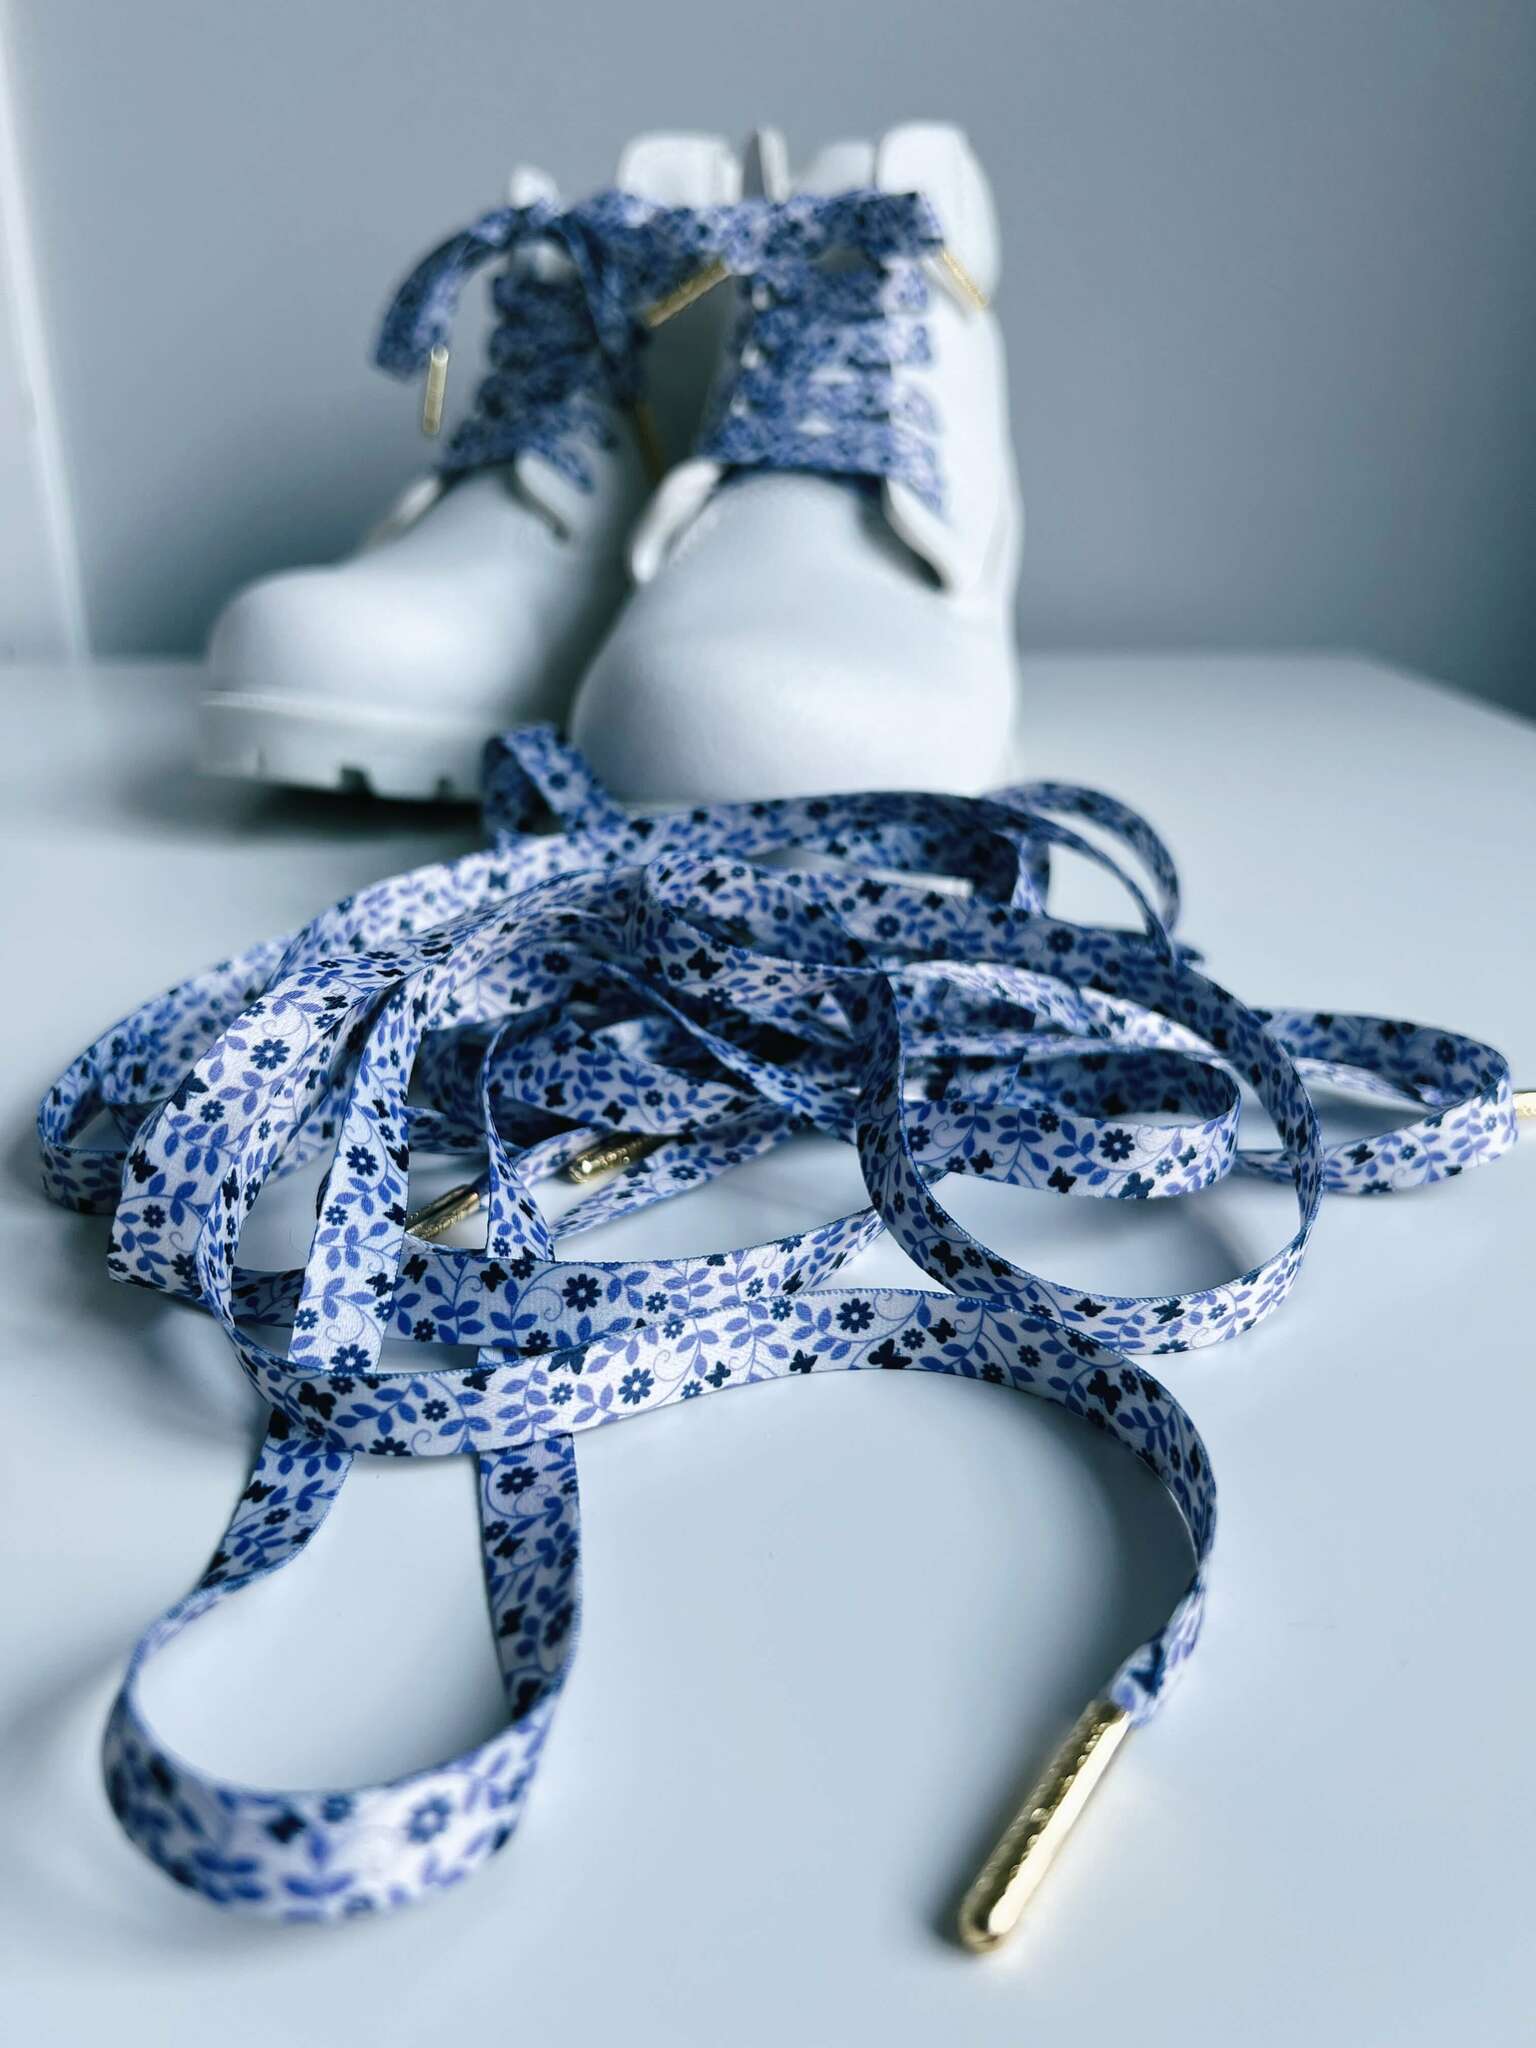 Patterned shoelaces with butterflies & flowers - The Shoelace Brand